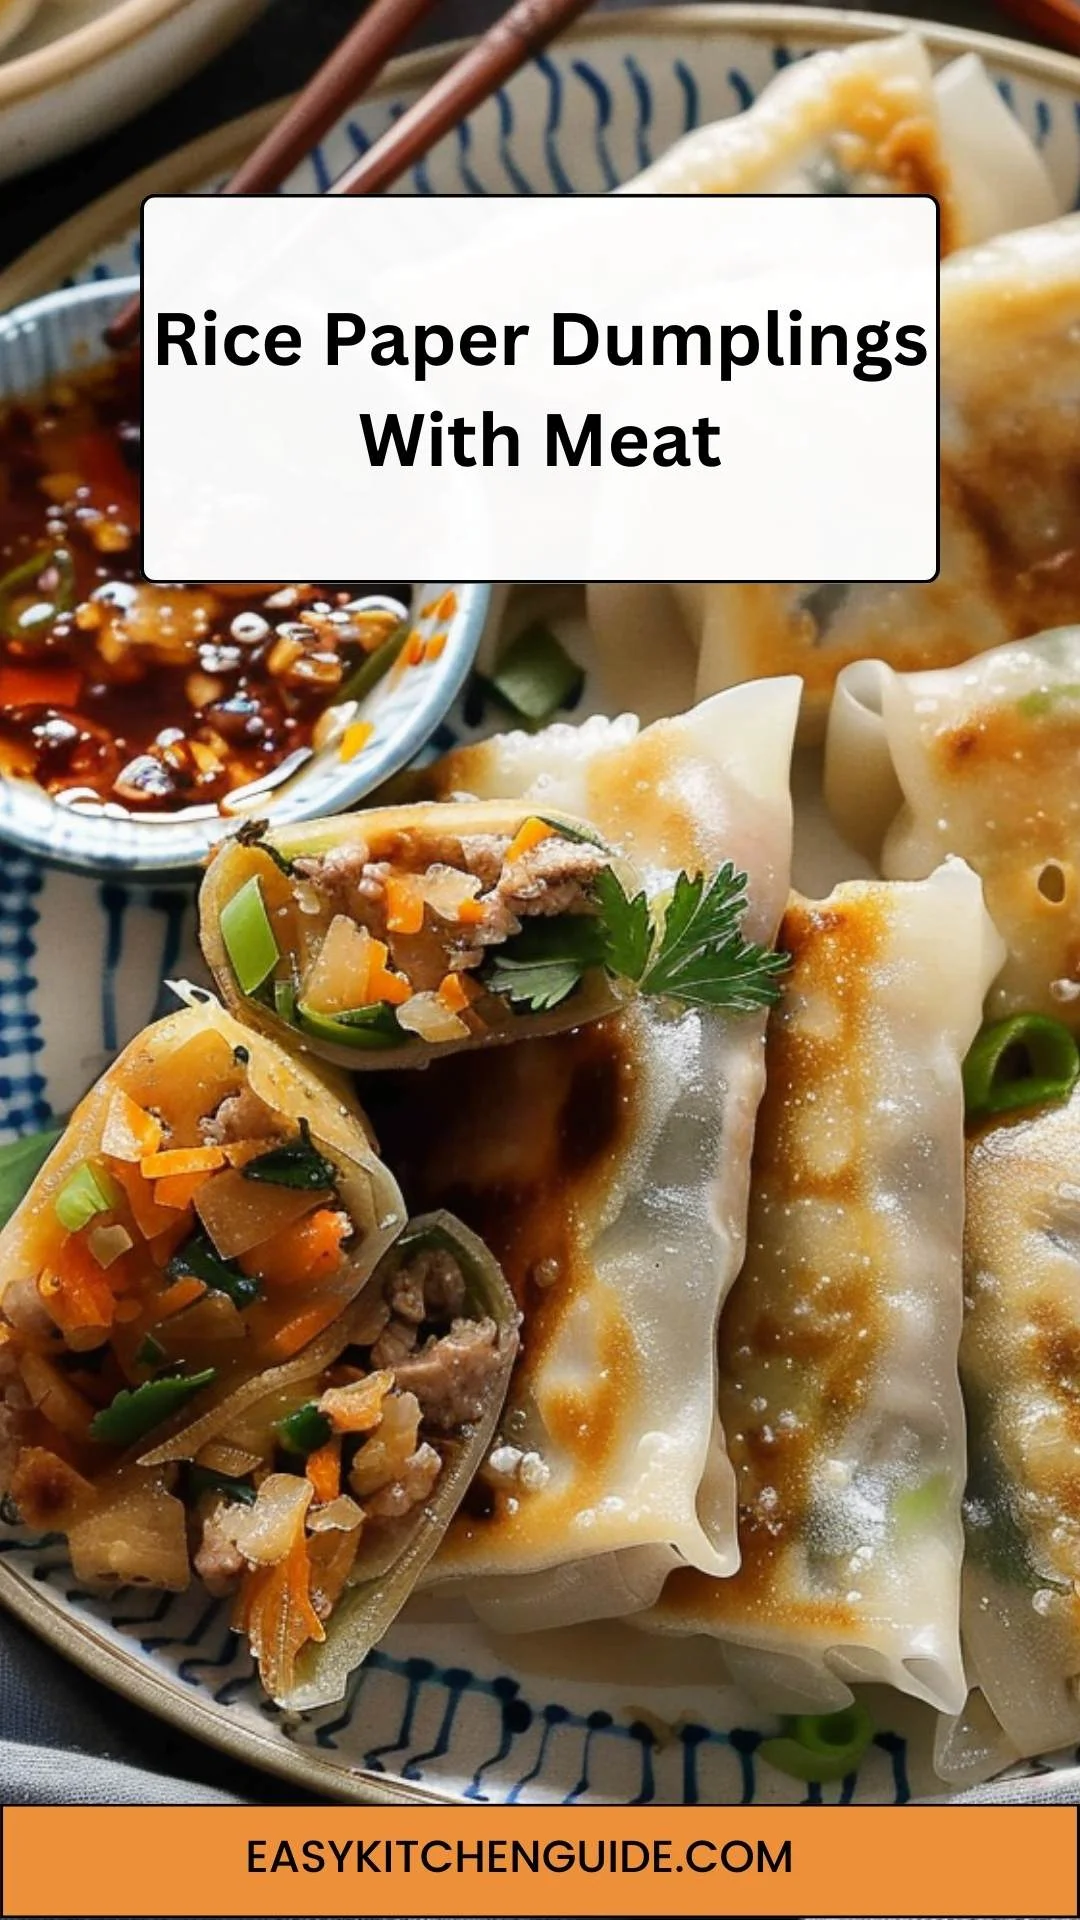 Rice Paper Dumplings With Meat